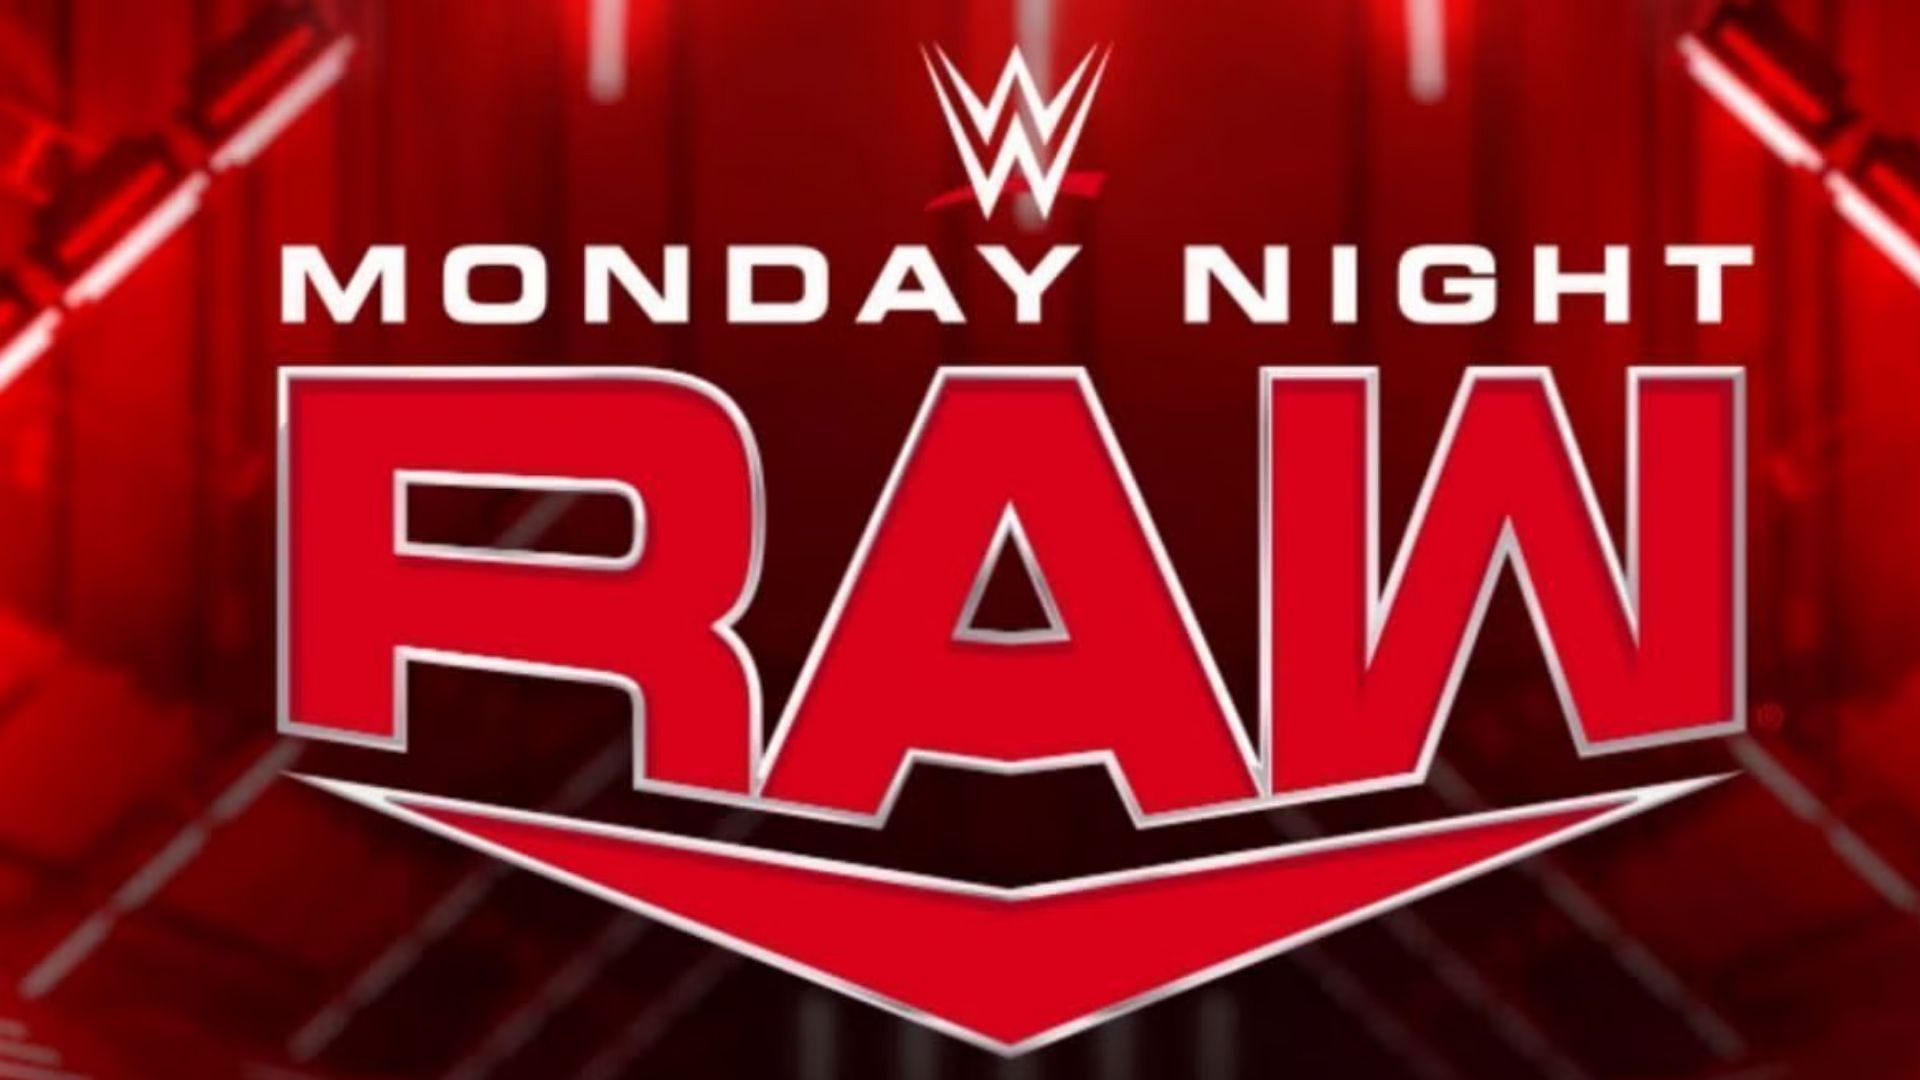 WWE RAW was a big show this week